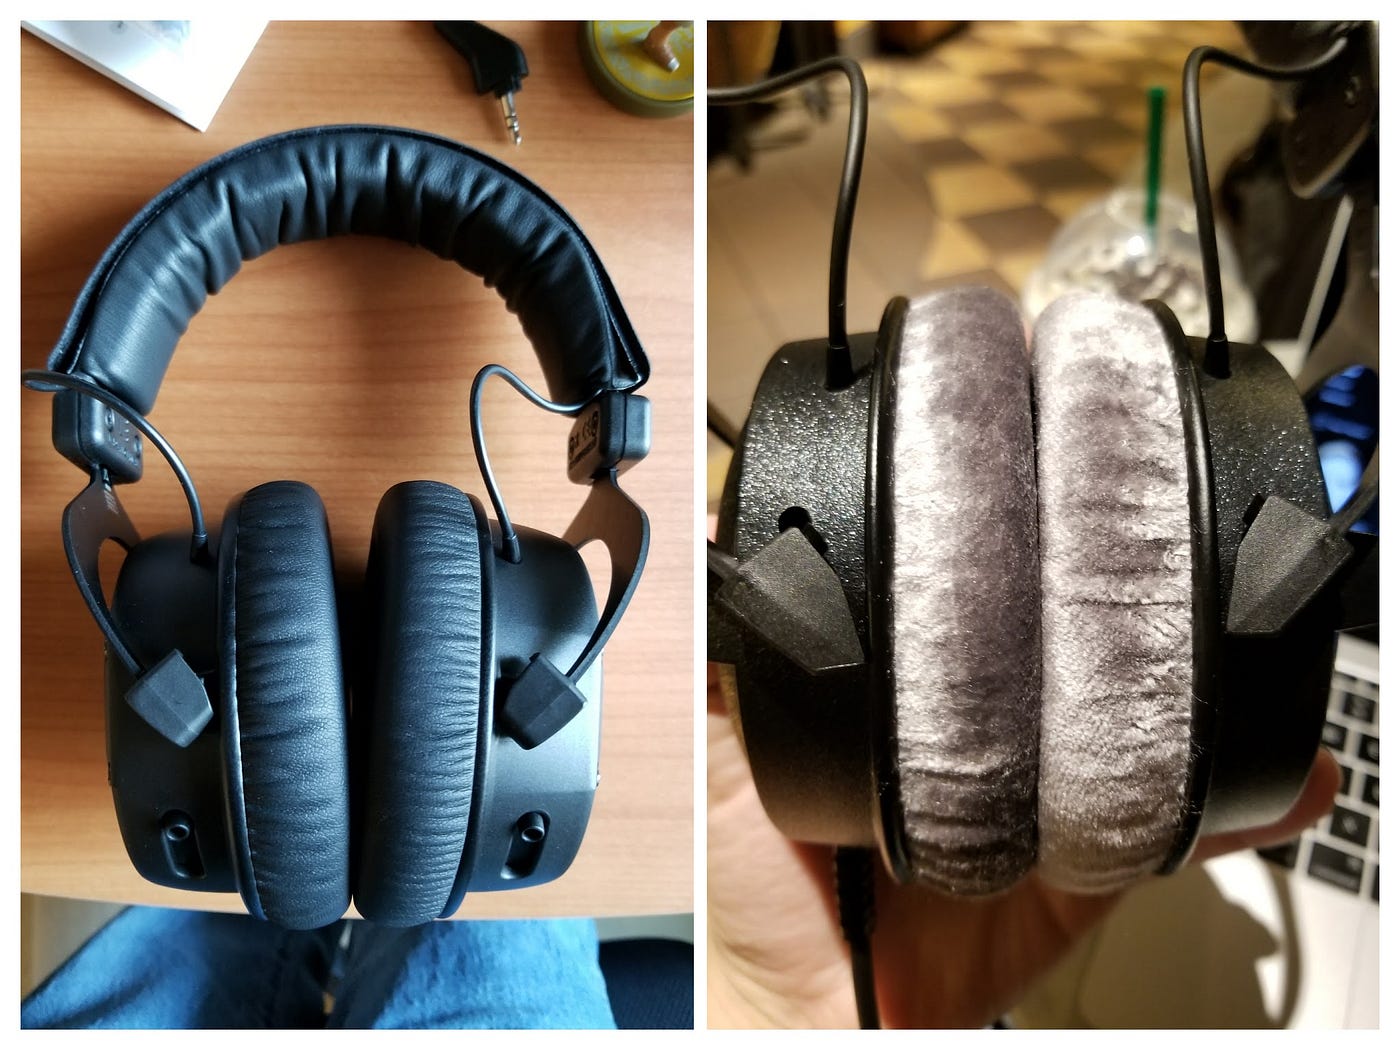 These Speak to Me on an Emotional Level” — Beyerdynamic DT 770 Pro 250 Ohm  Review, by Alex Rowe